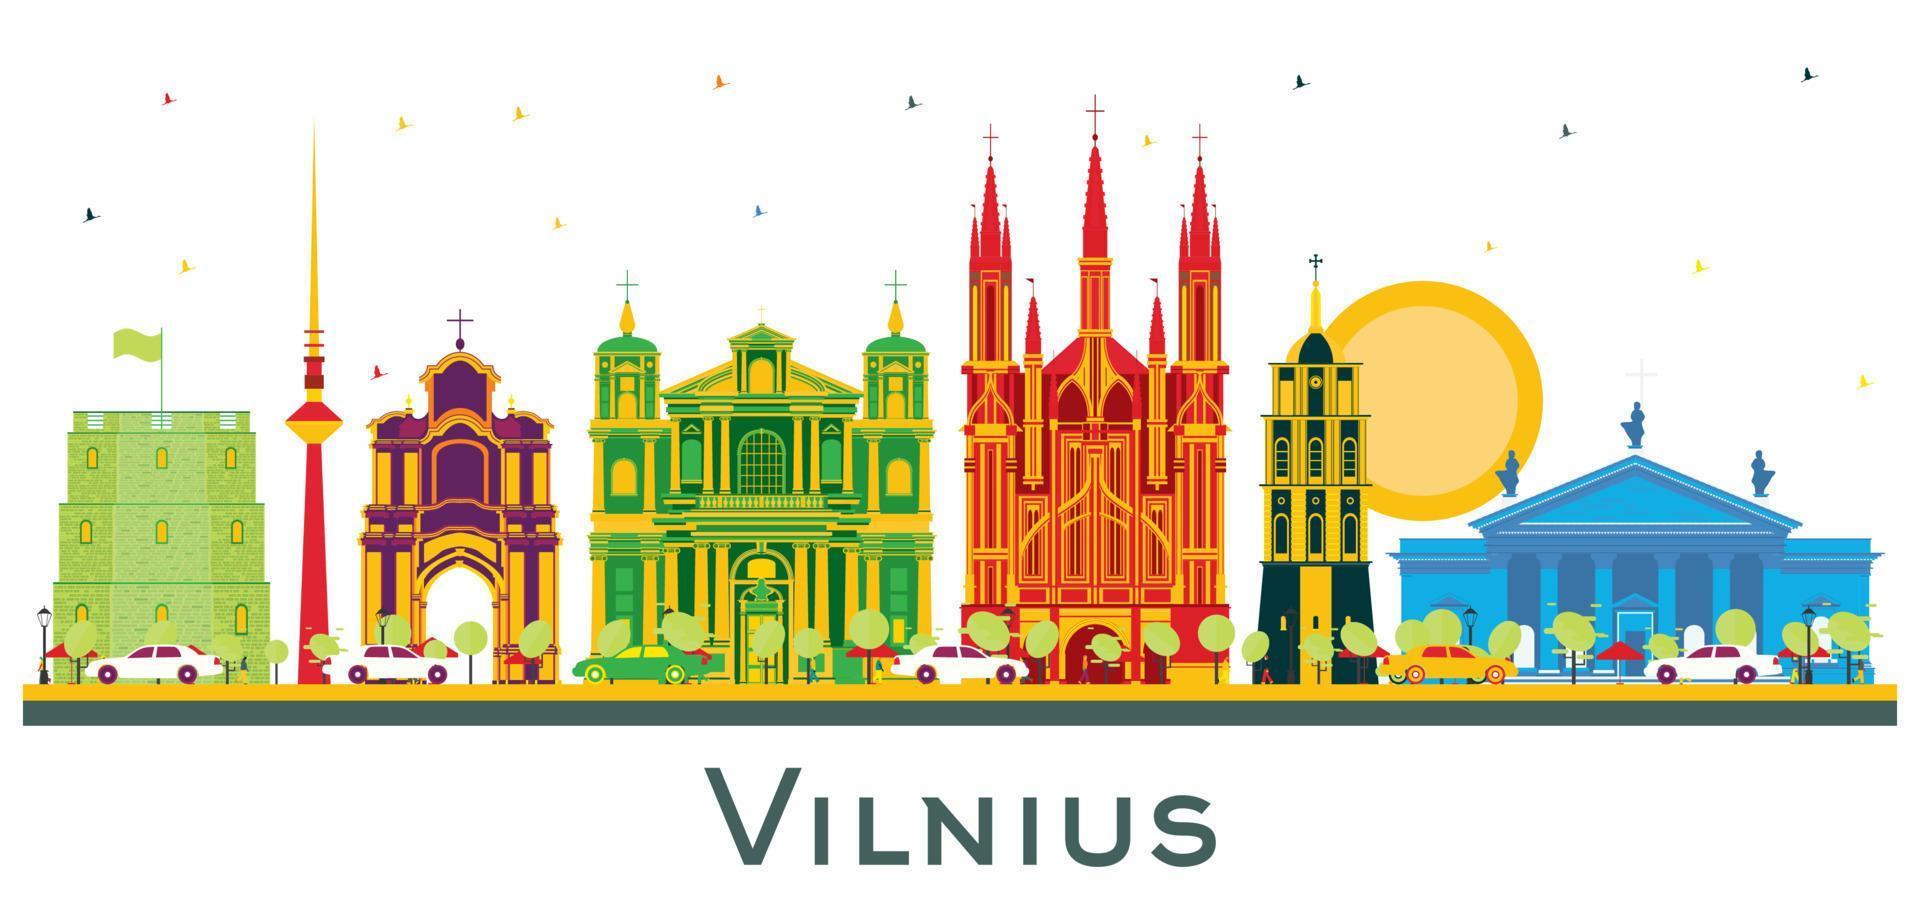 Vilnius Lithuania City Skyline with Color Buildings Isolated on White. vector